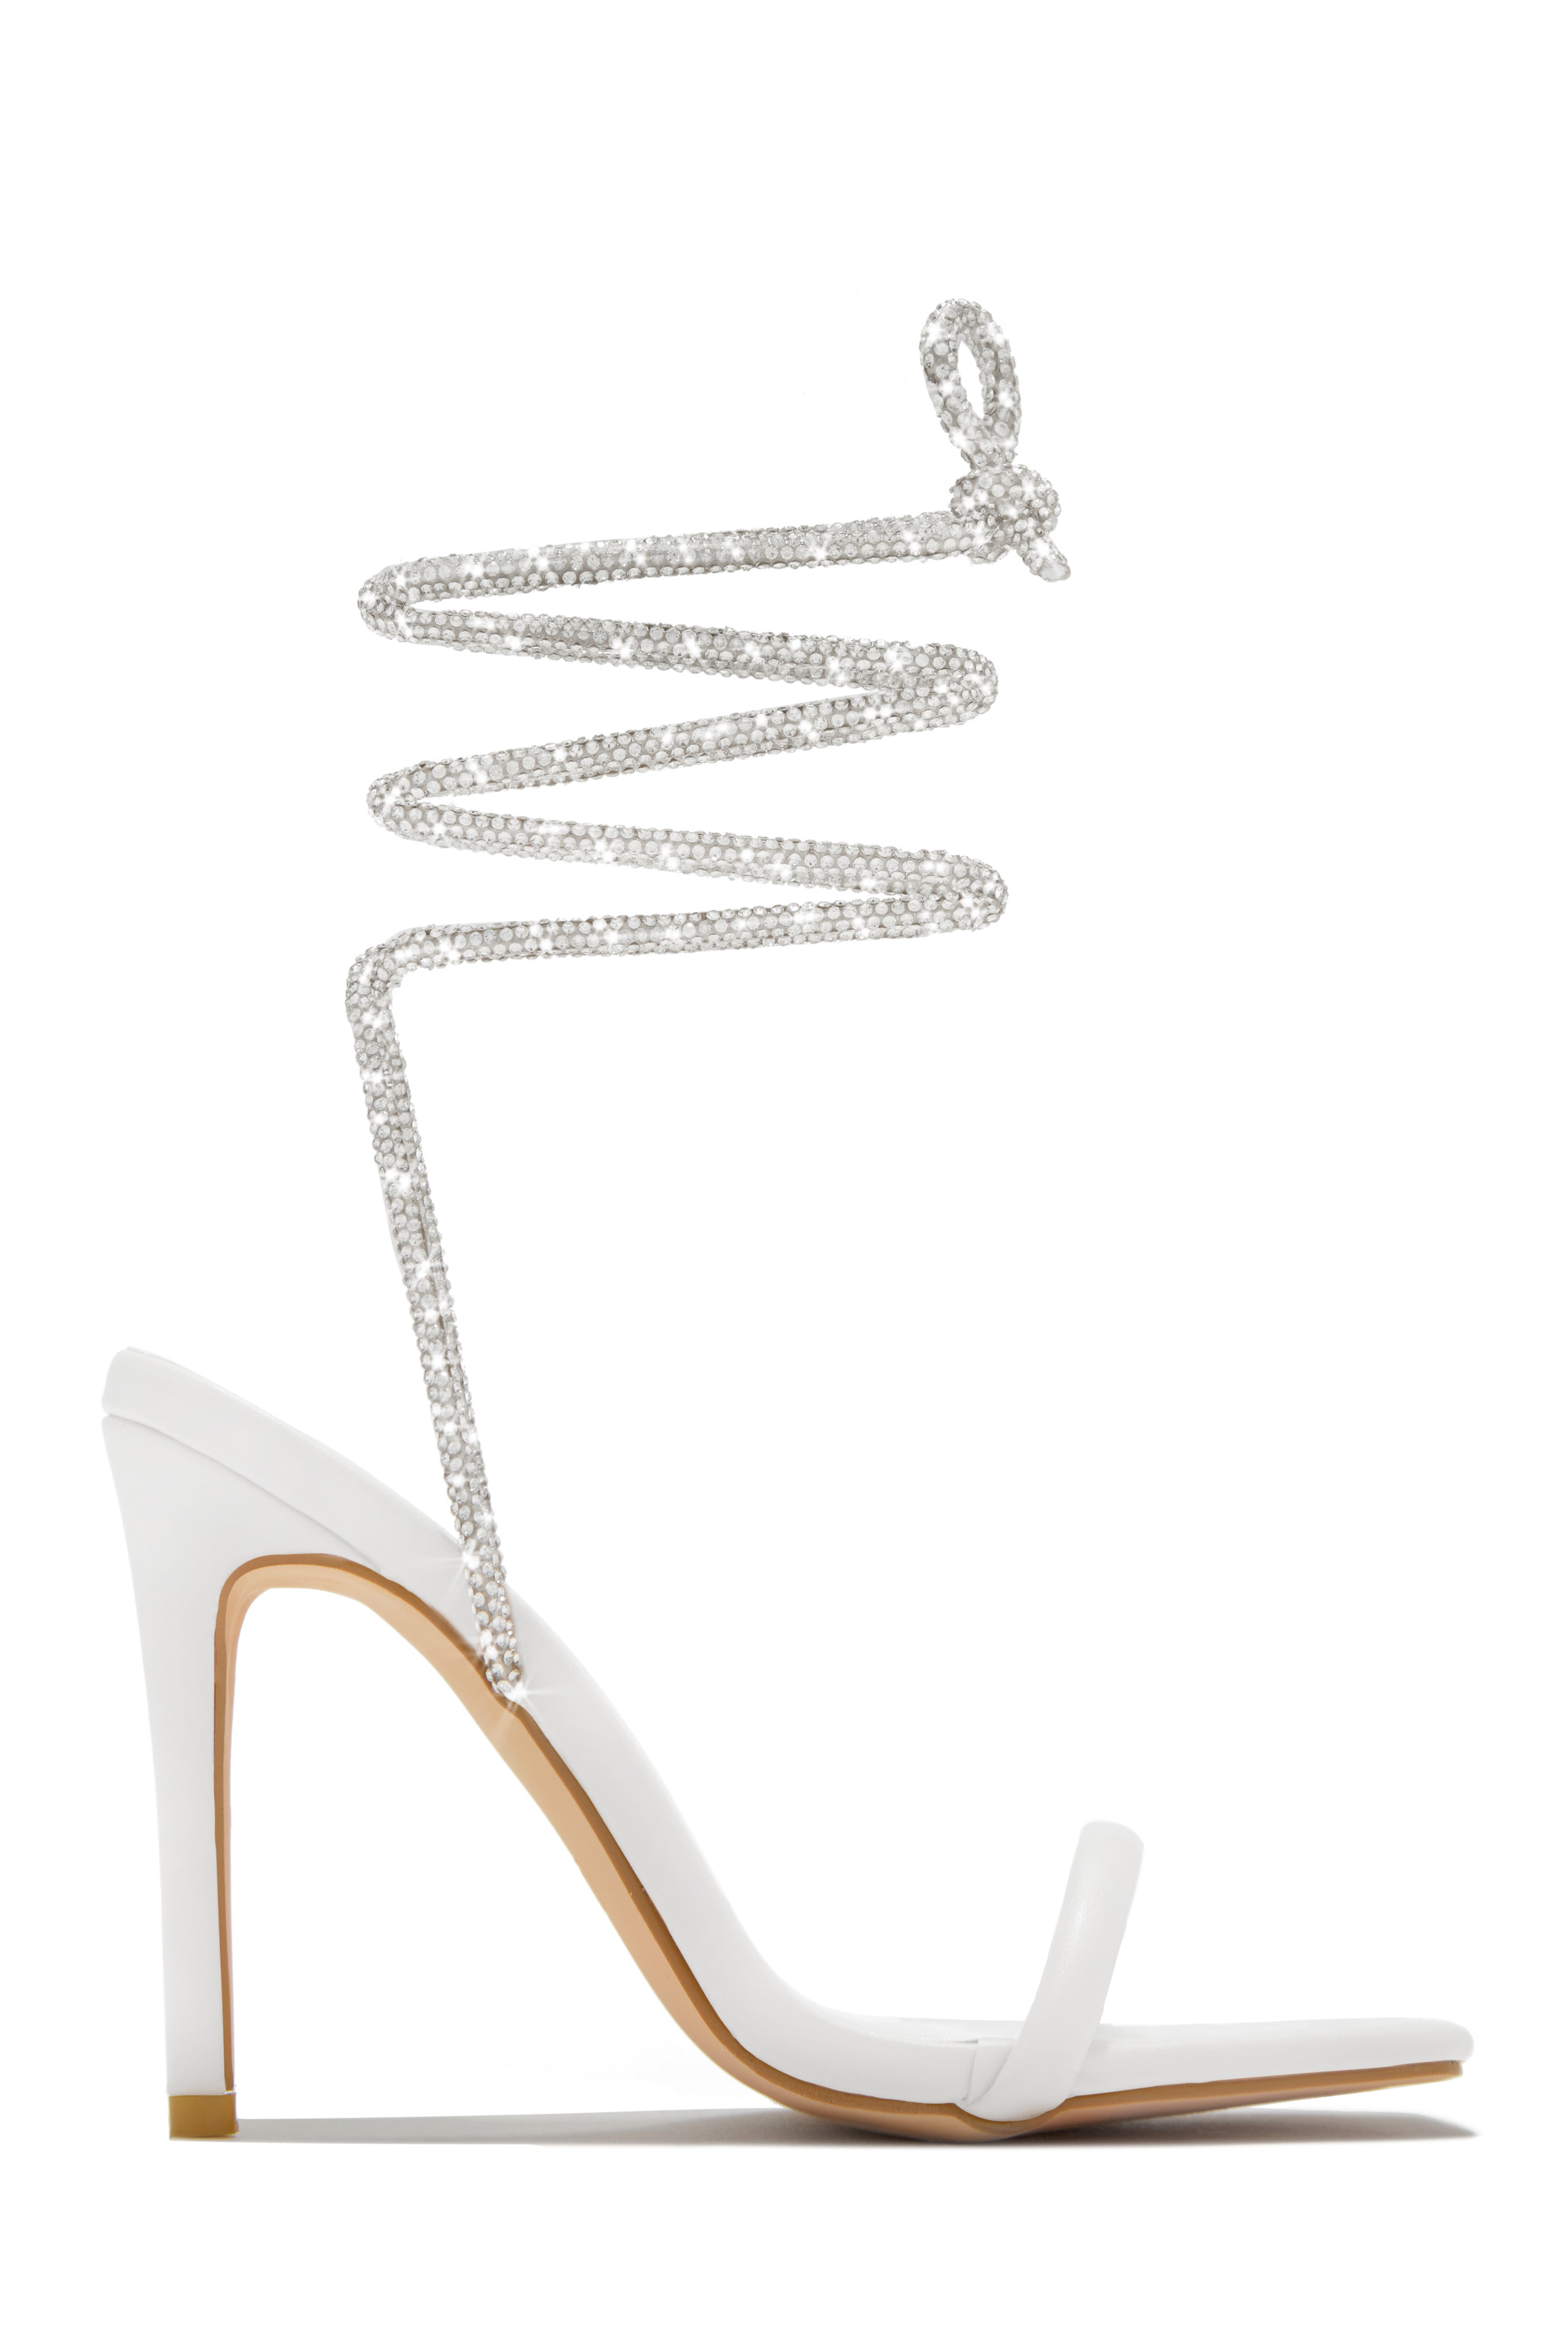 Miss Lola | Pretty Girl White Embellished Lace Up High Heels – MISS LOLA